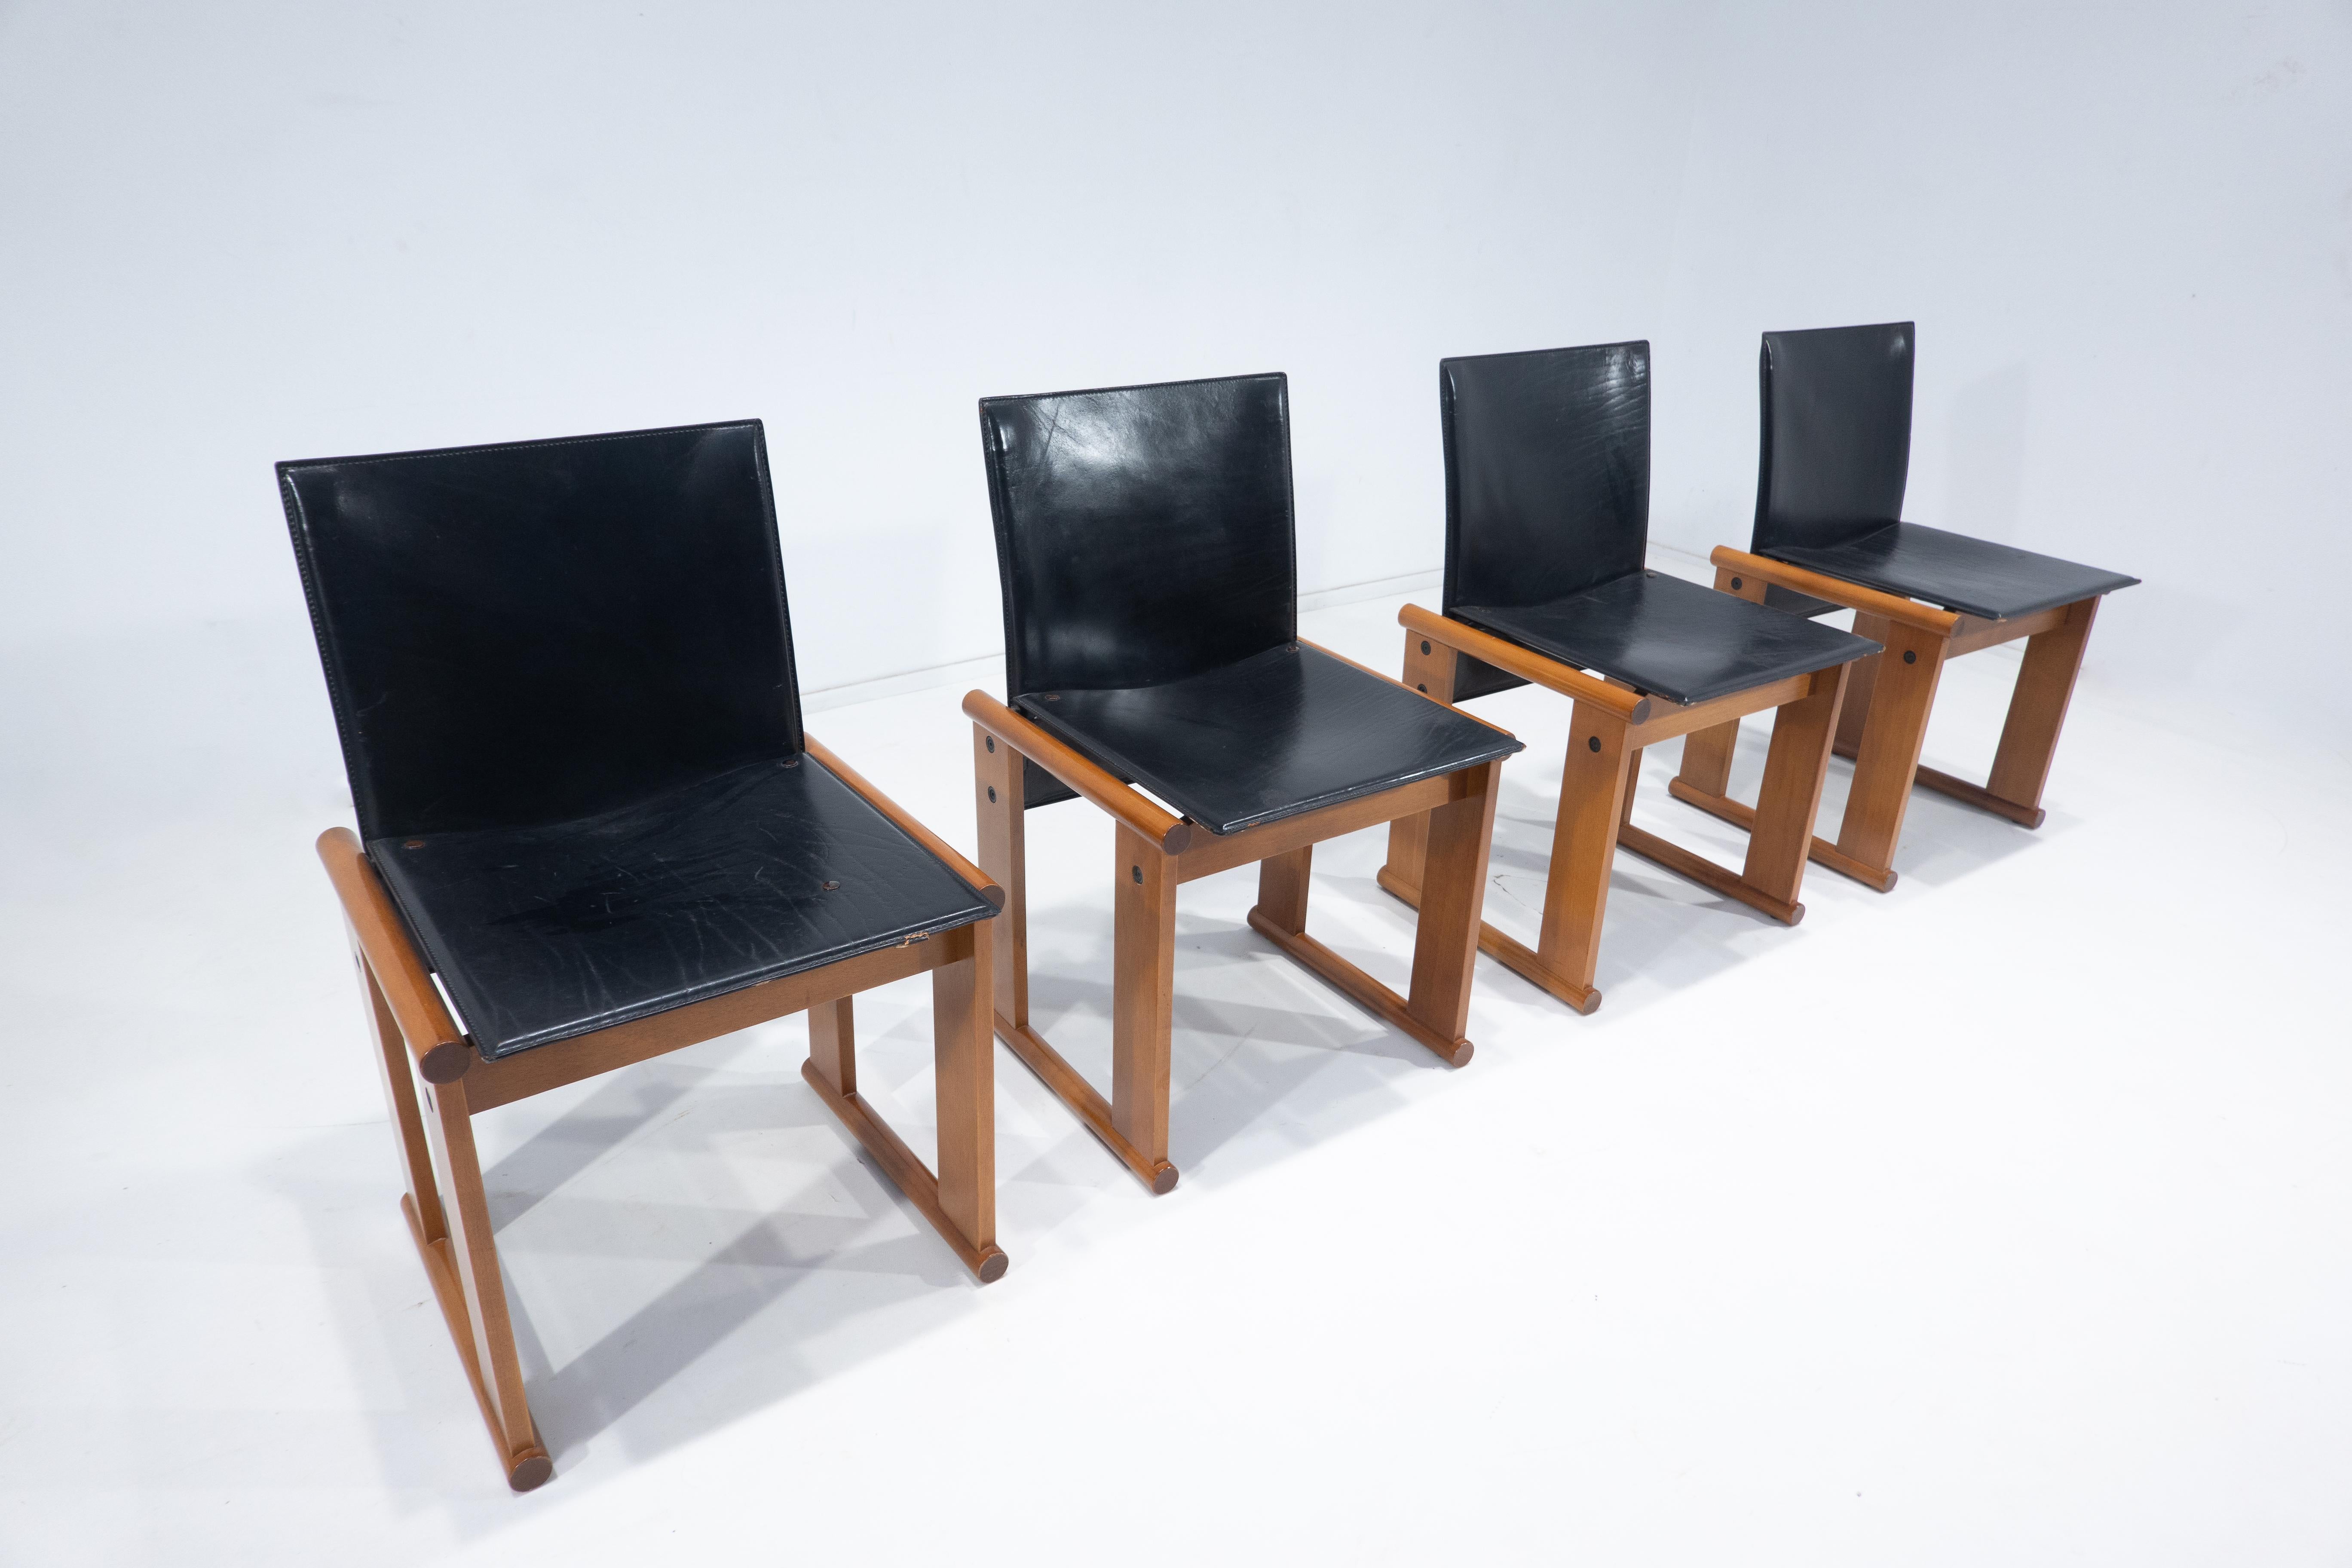 Italian Mid-Century Modern Set of 4 Chairs by Afra and Tobia Scarpa, Italy, 1960s For Sale